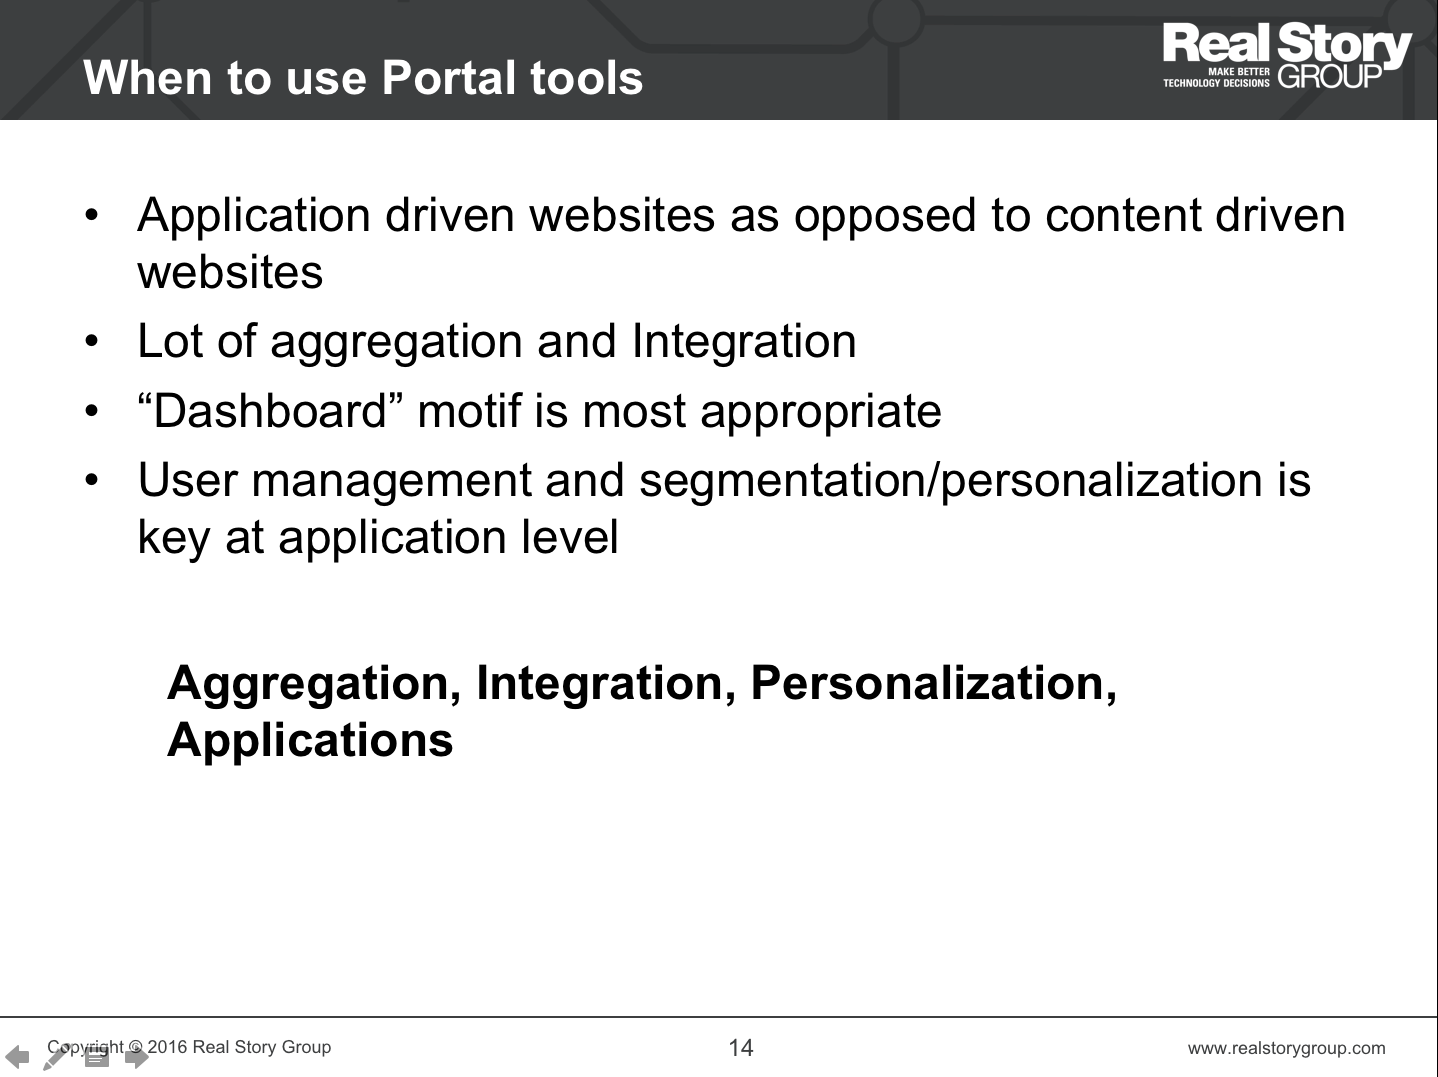 When to use Portal tools?